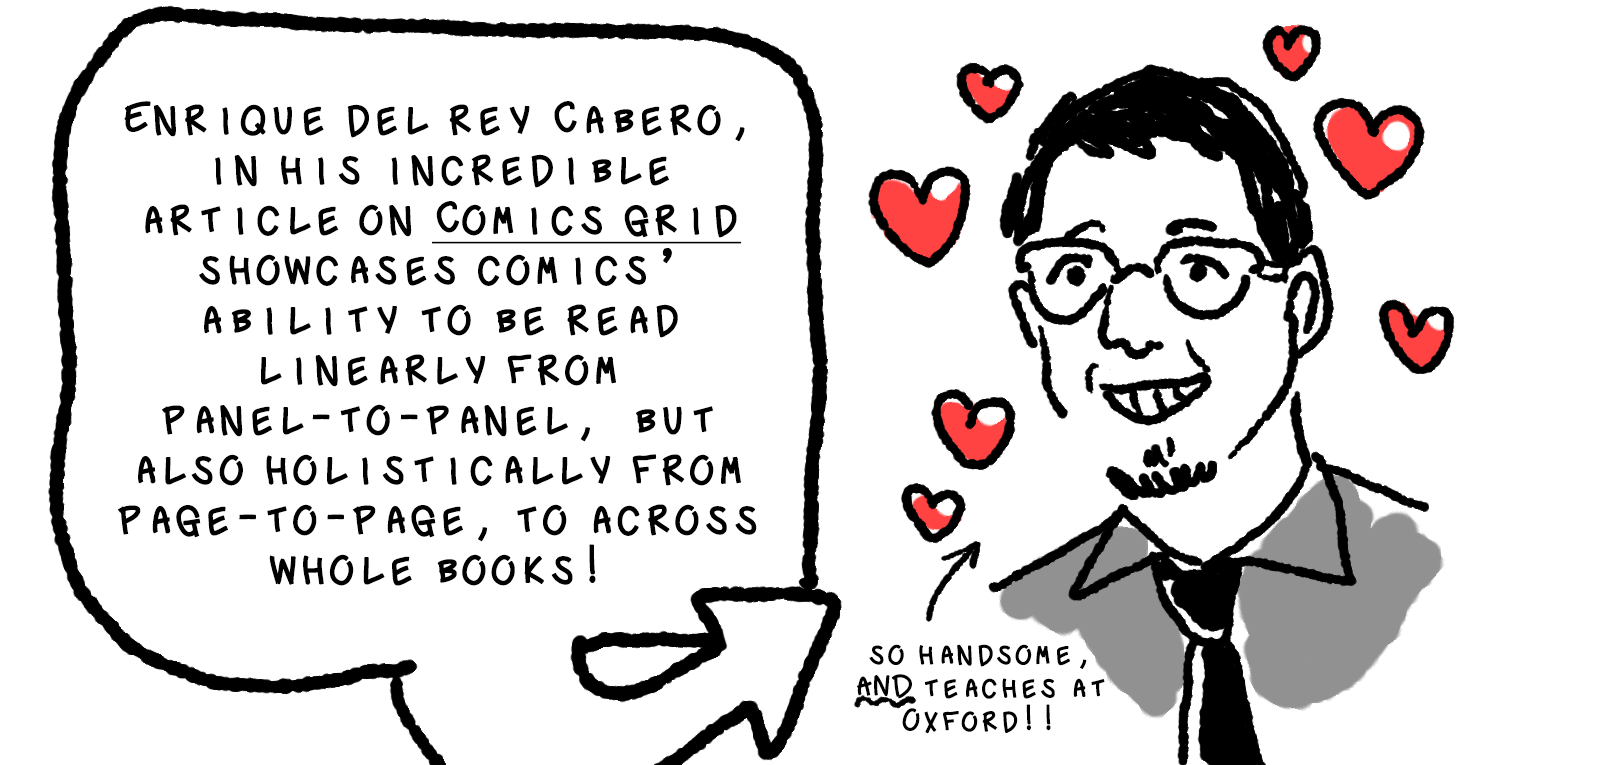 Next wee see a portrait of a grinning young mand with a short goatee, glasses, and short dark hair. He's wearing a collared shirt and tie. There are little red hearts drawn around his face. A big bubble with an arrow pointing towards the figure reads: Enrique del Rey Cabero, in his incredible article on Comics Grid [link], showcases comics' ability to be read linearly from panel-to-panel, but also holistically from page-to-page to across whole books! Another smaller arrow pointed at Del Rey Cabero reads, So handsome, and teaches at Oxford!